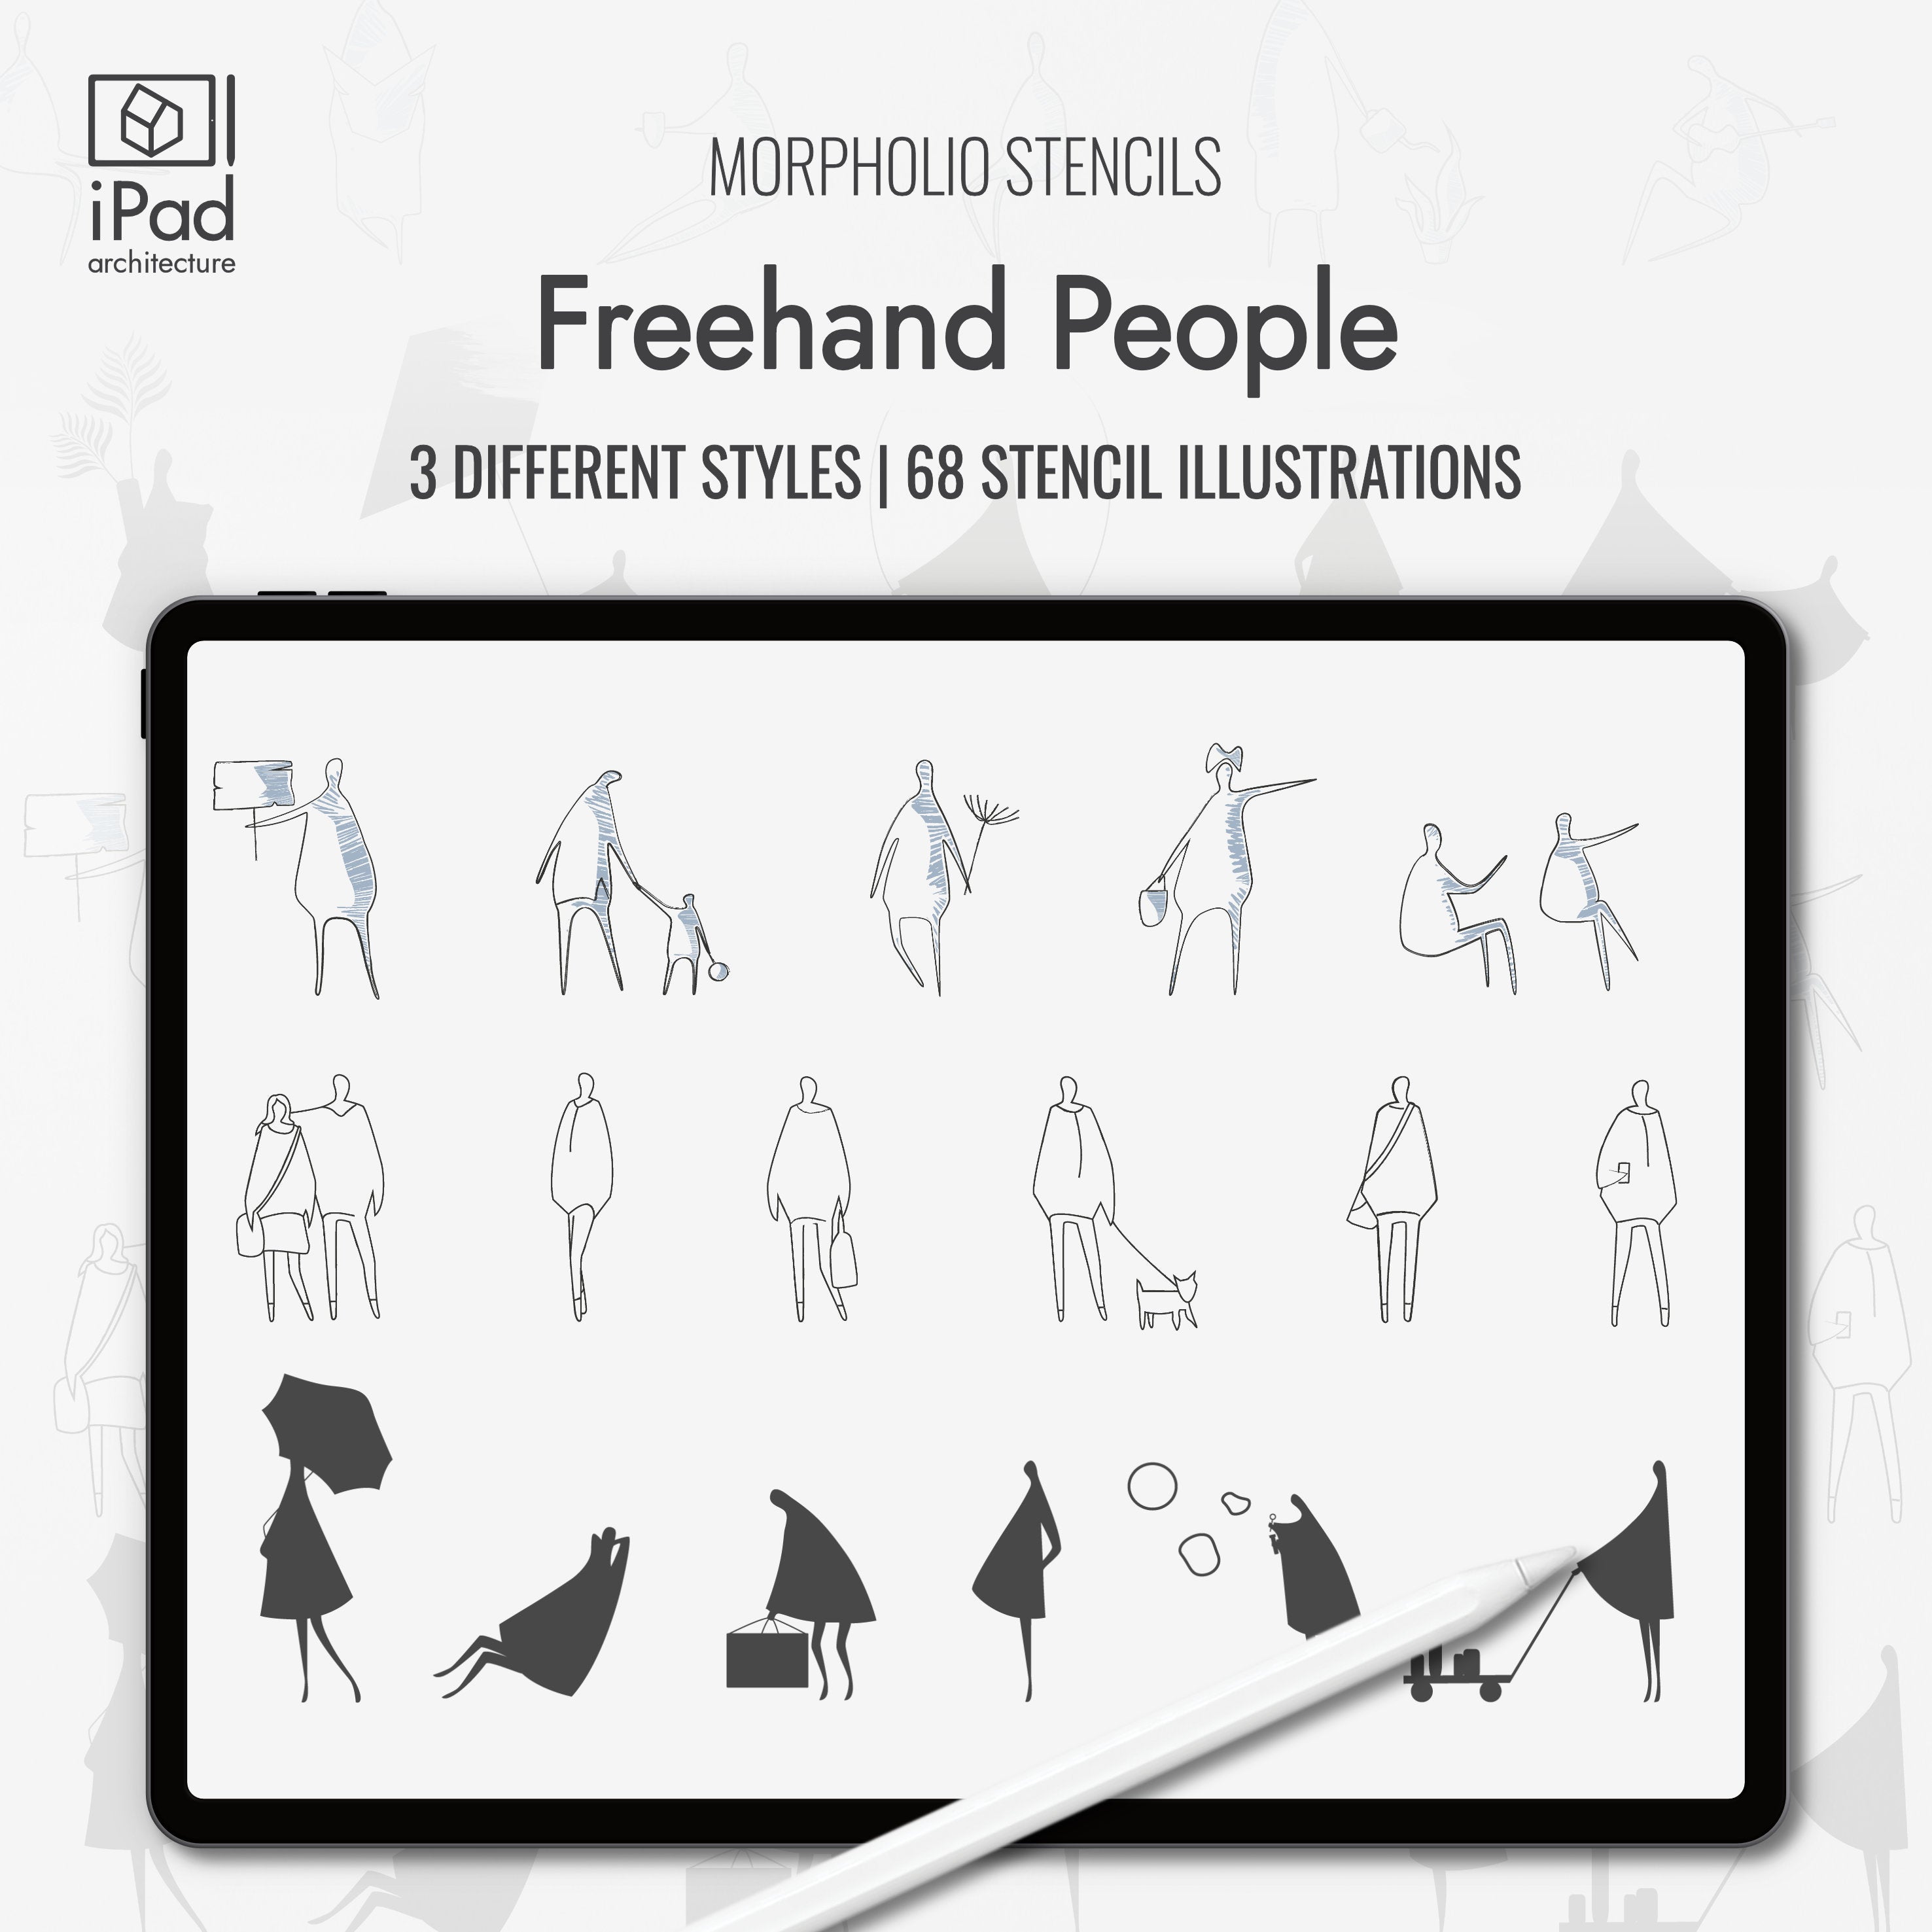 Morpholio Freehand People Stencil Set PNG - Toffu Co